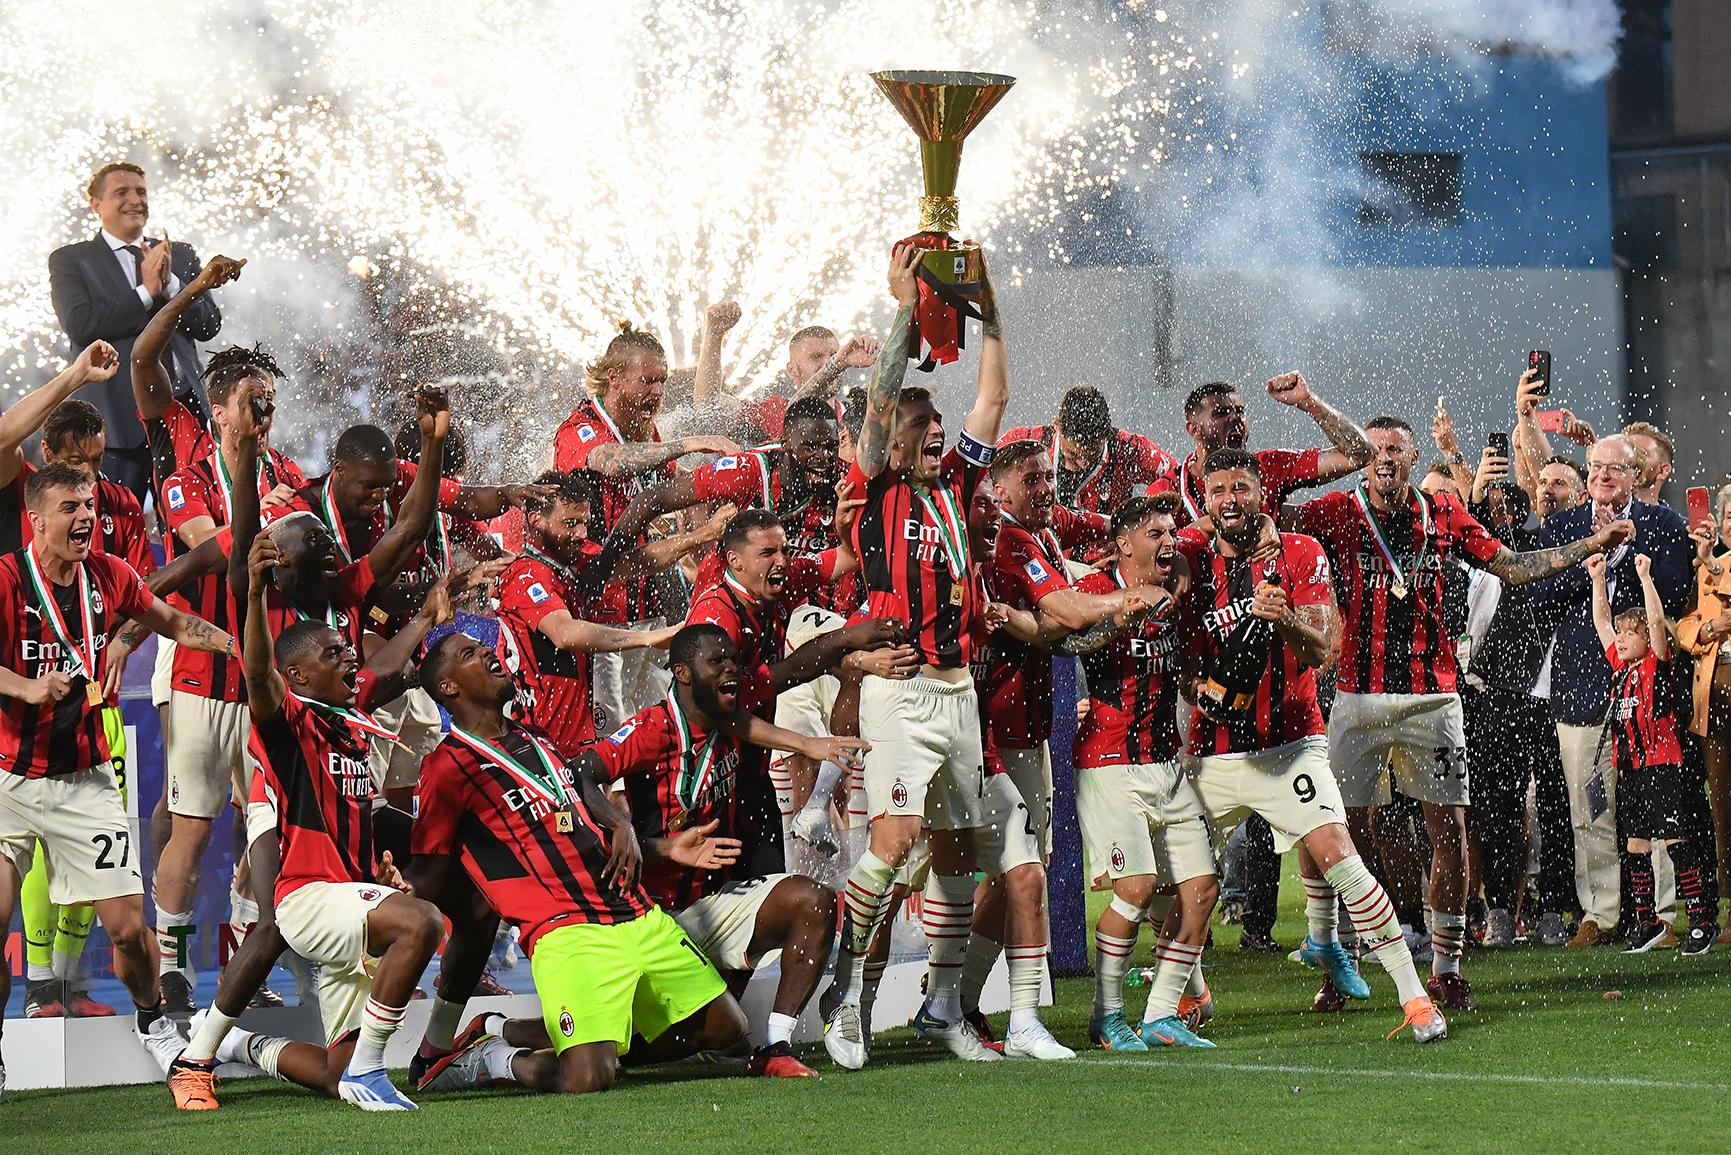 Serie A 2022/23 fixtures: AC Milan begin their title defence against Udinese, Check all the 2022/23 Serie A fixtures of Juventus, AC Milan, Inter Milan